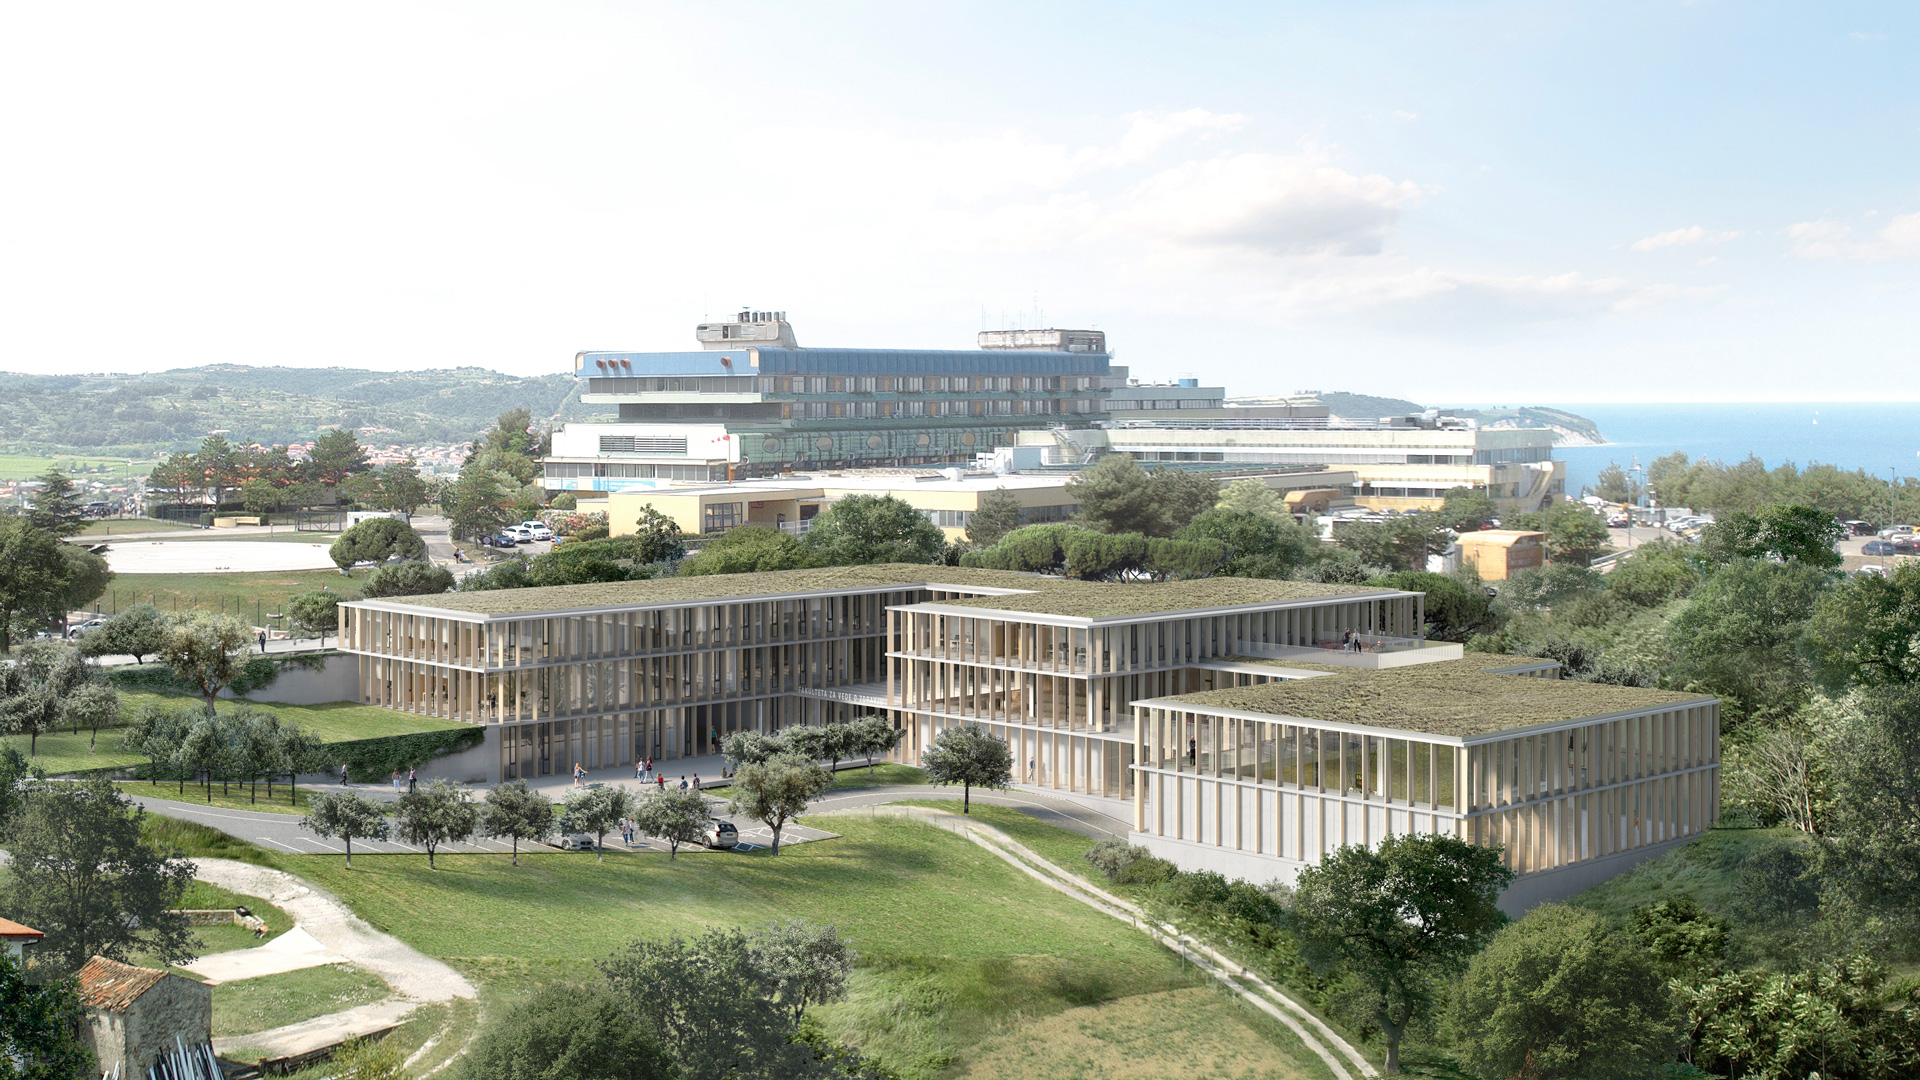 FACULTY OF HEALTH SCIENCES, University research and teaching building, Izola, Architecture, Studio Sadar